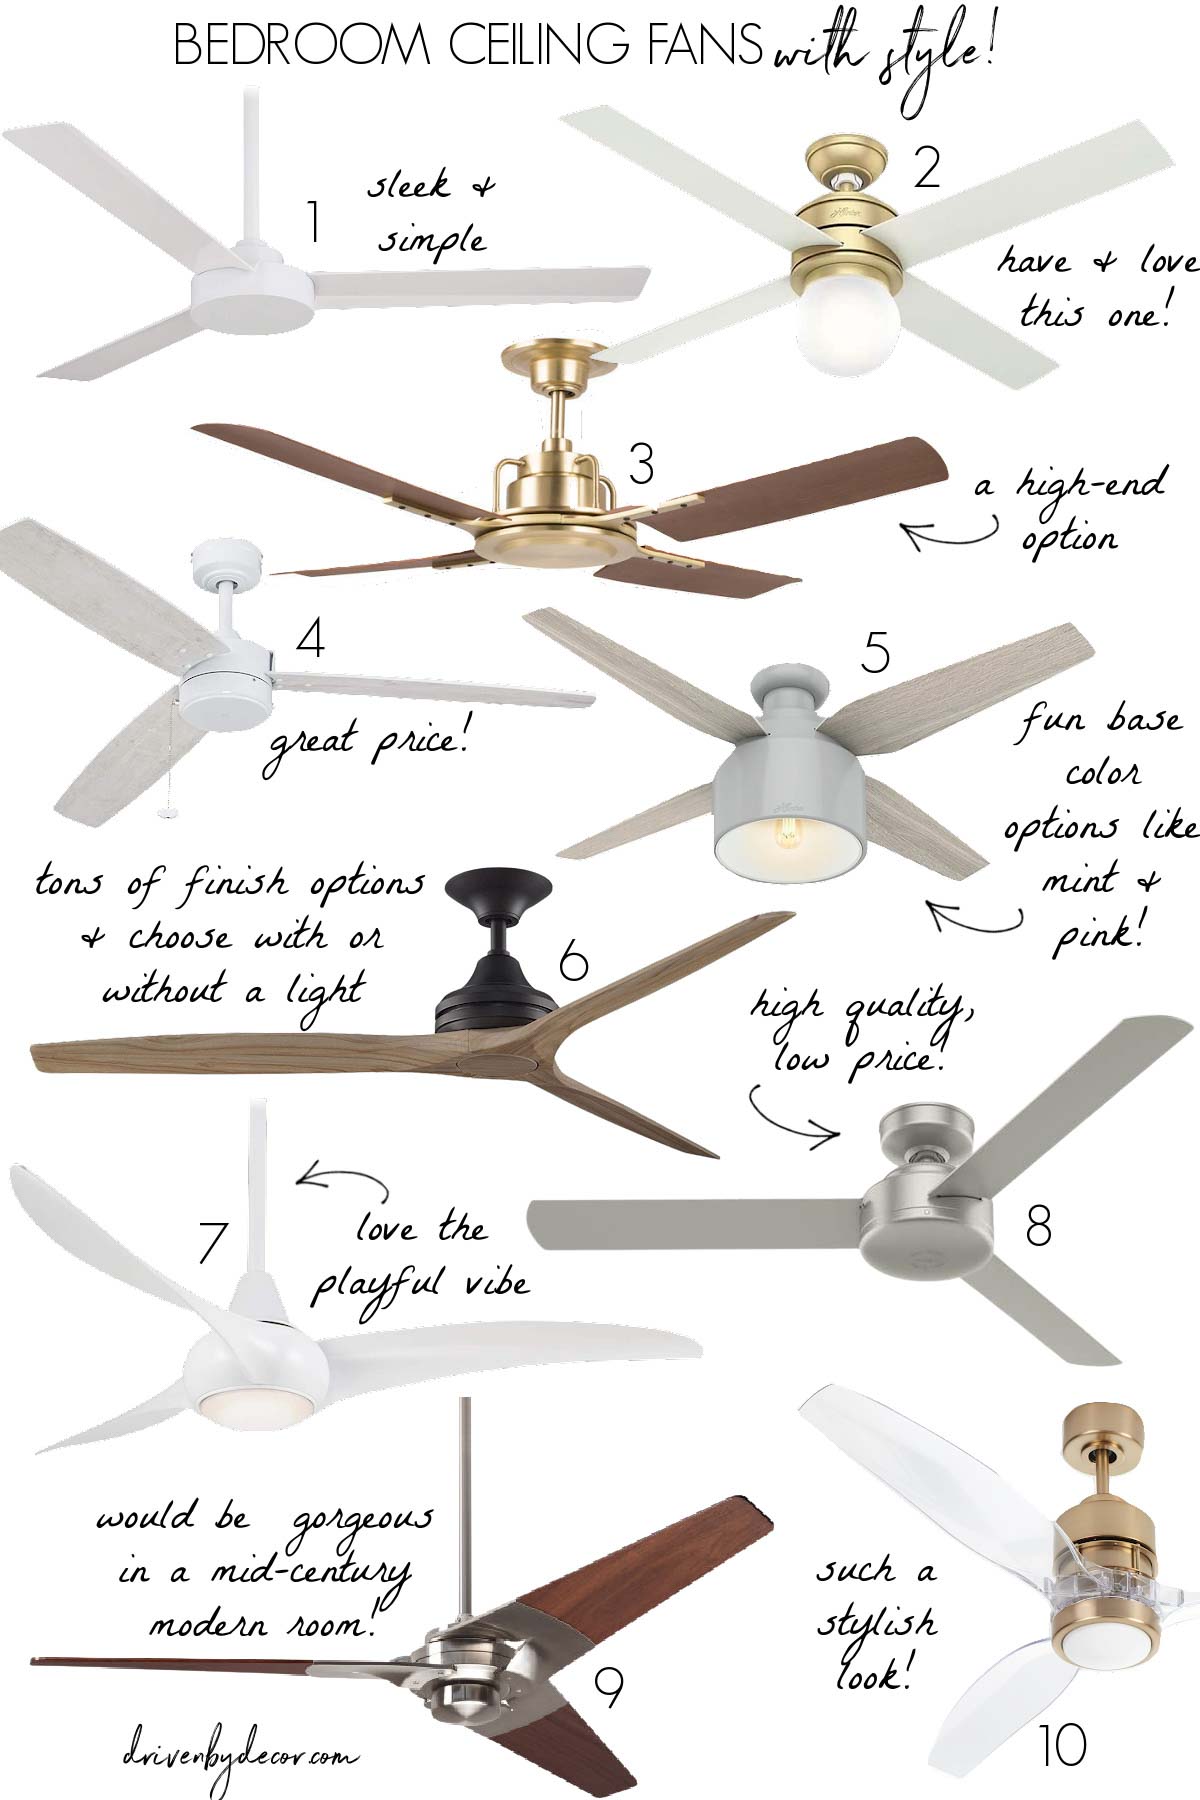 Best Ceiling Fans For Bedrooms: My 10 Favorites! - Driven by Decor